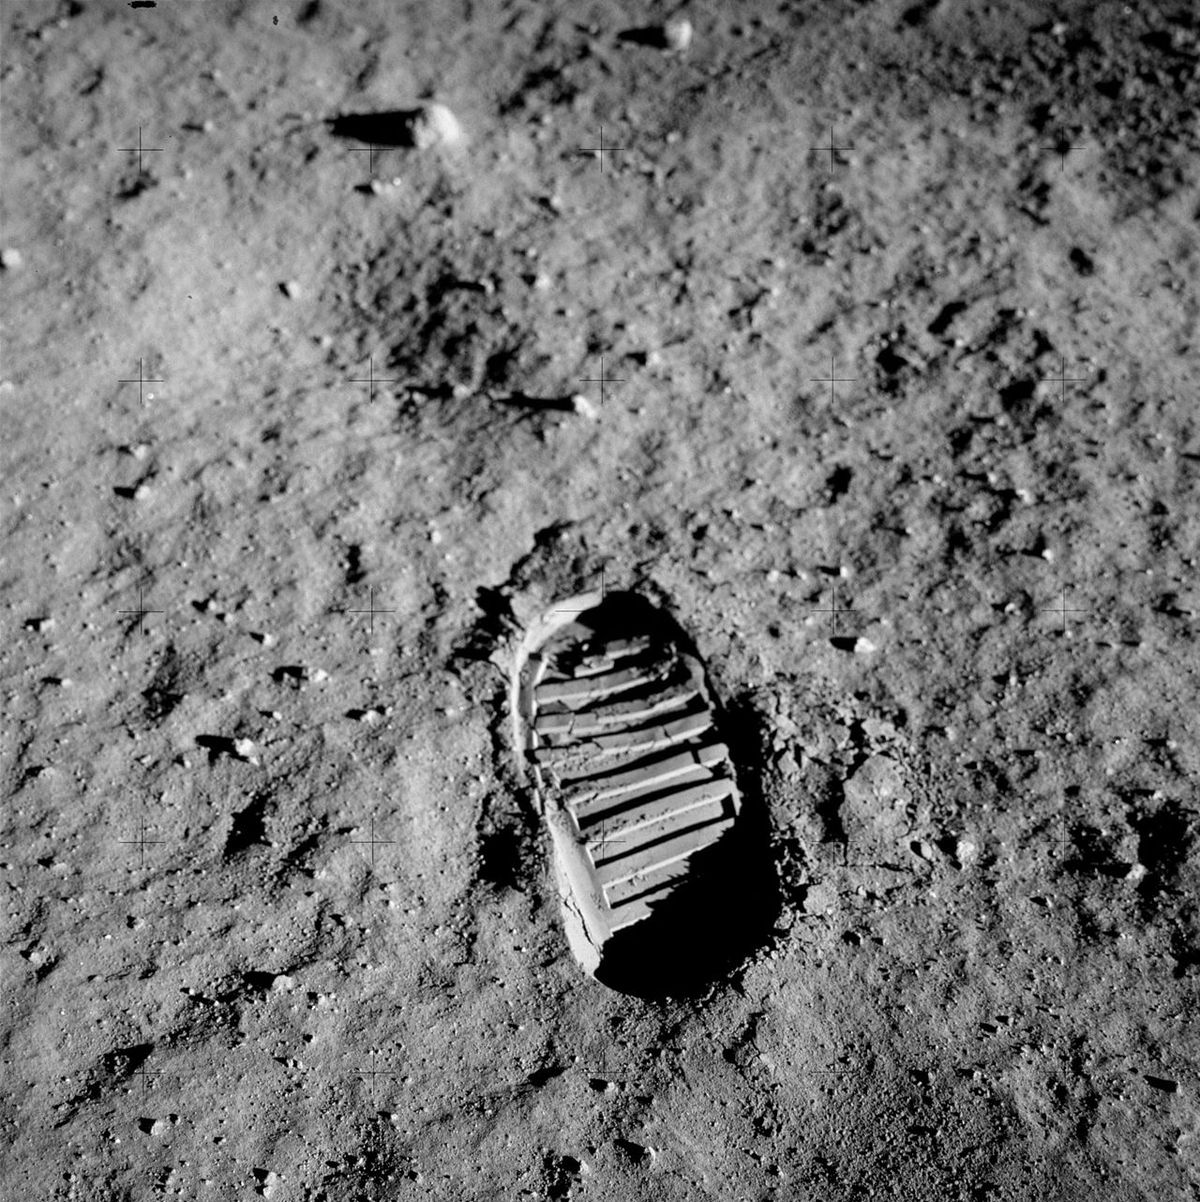 NASA sued over a vial of moon dust, but is it really from the moon?